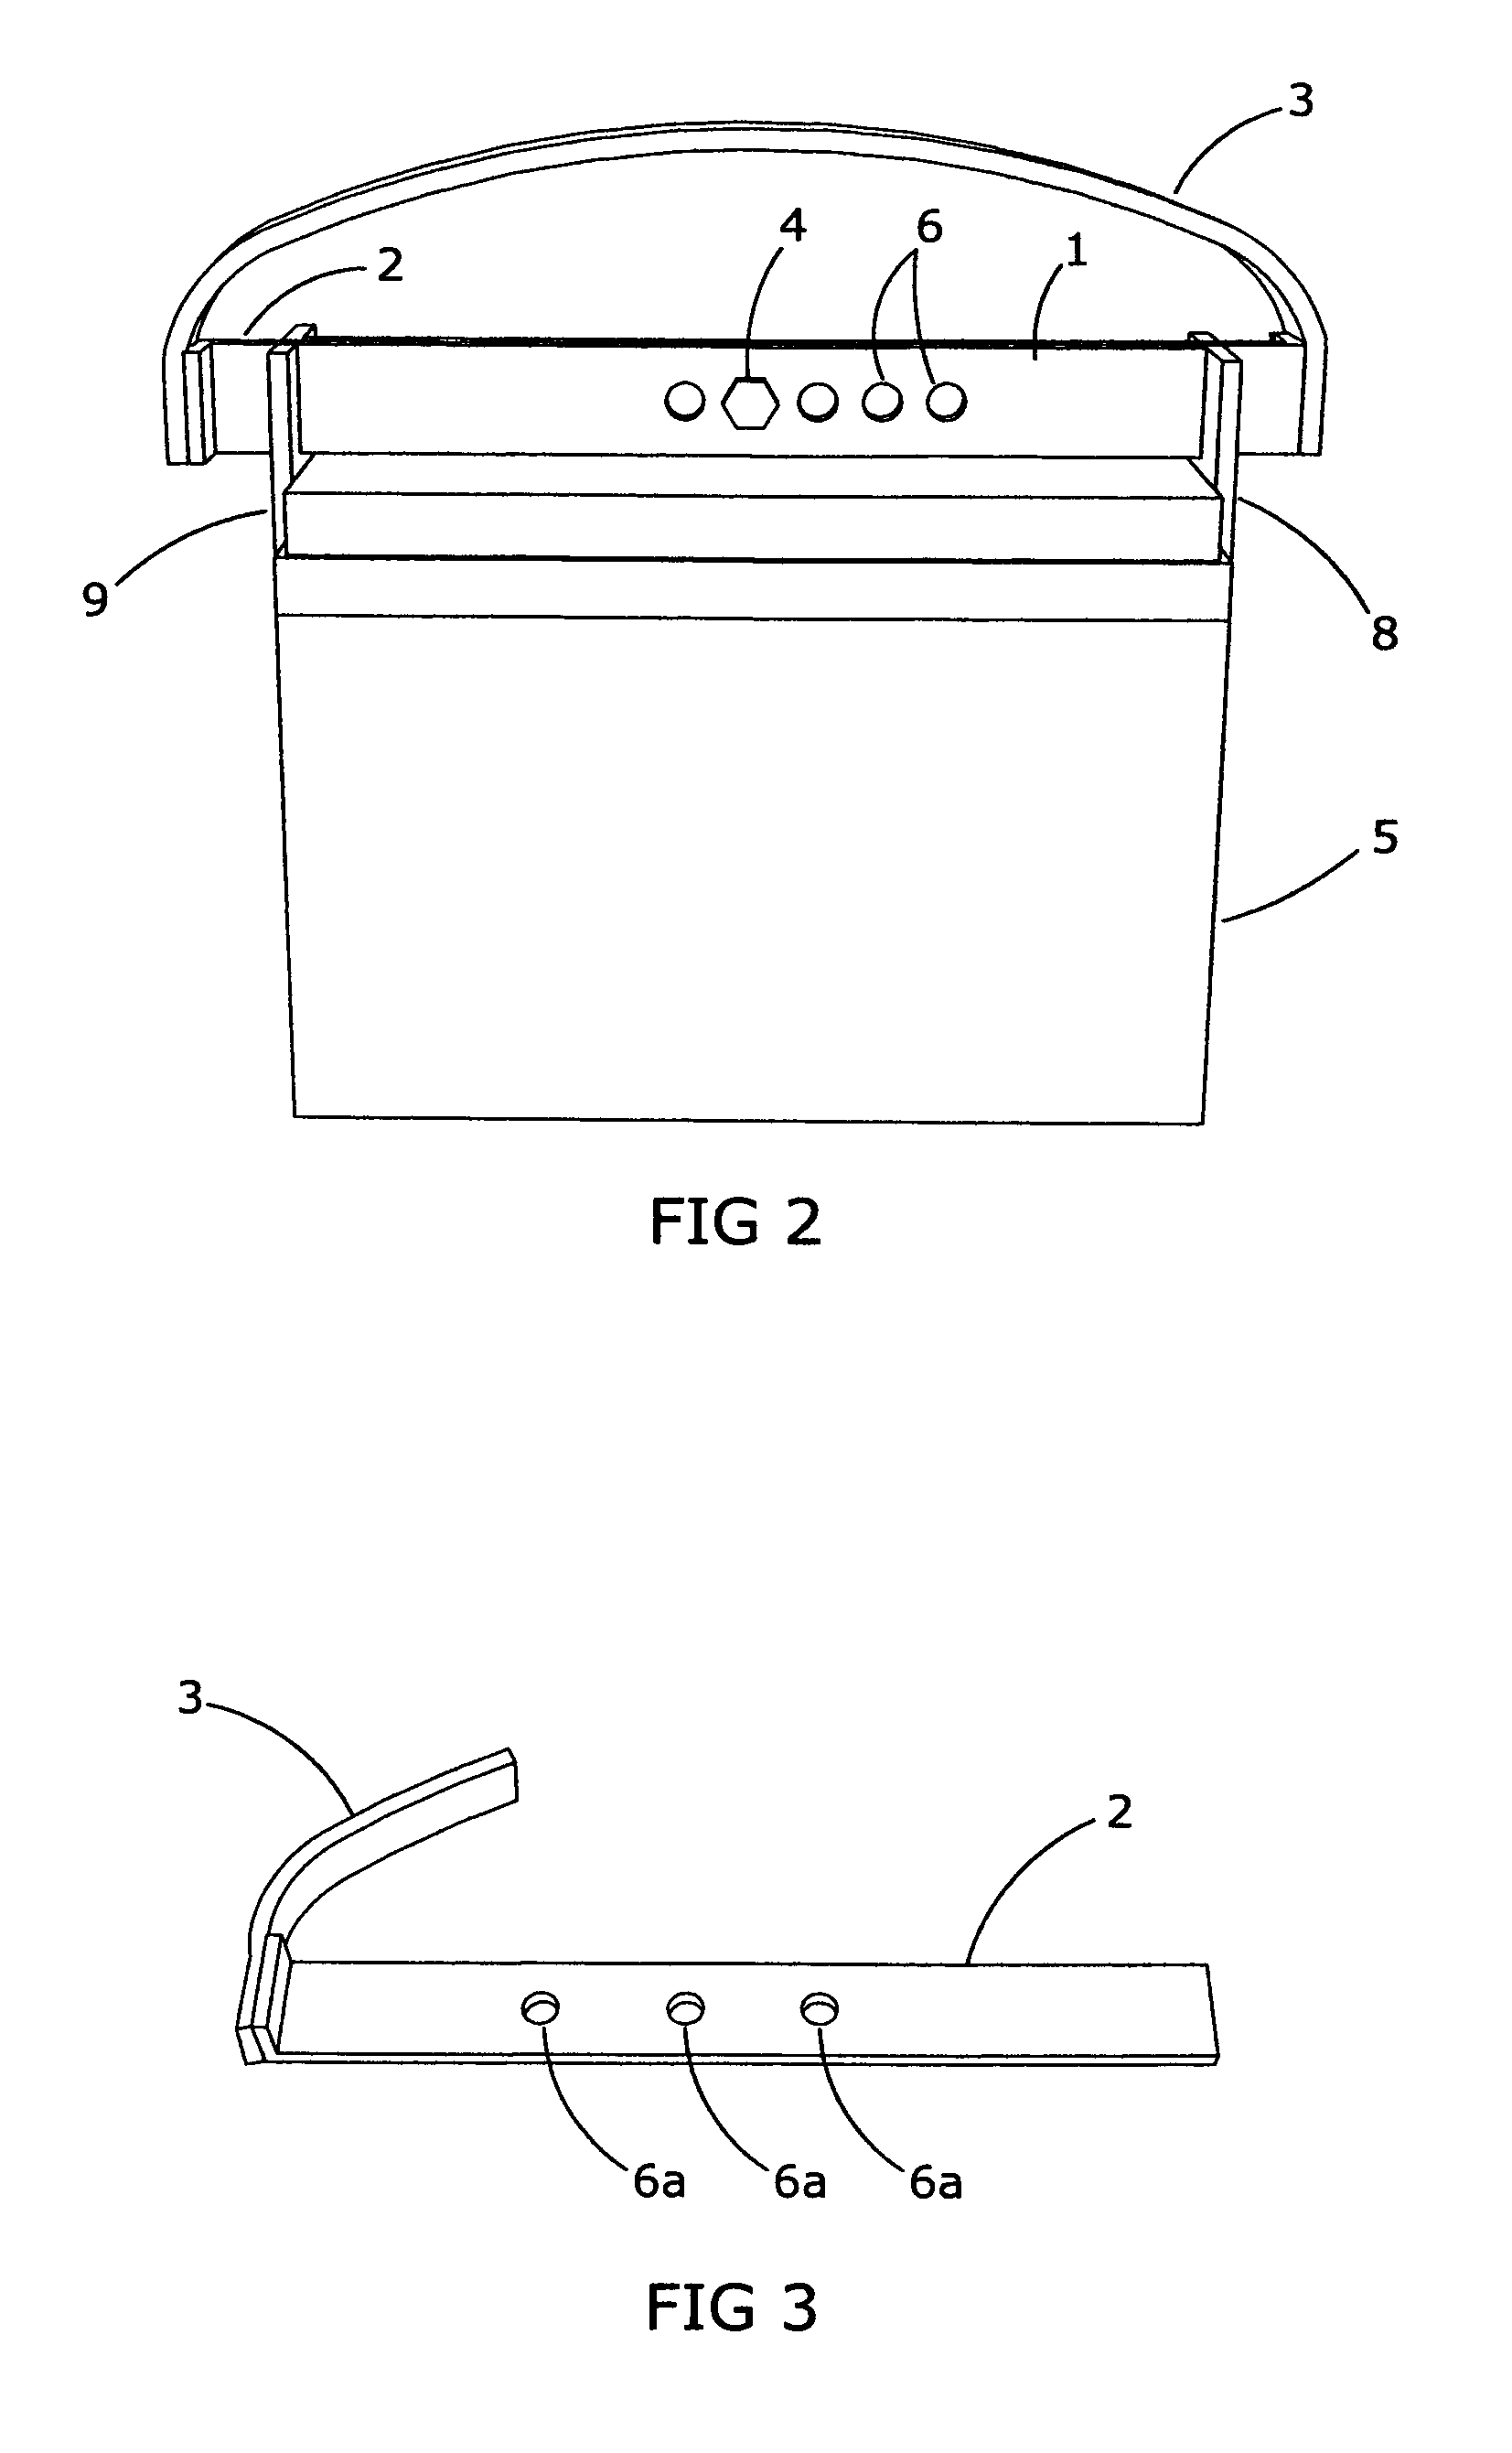 Carrier for installing and removing storage batteries from confined spaces